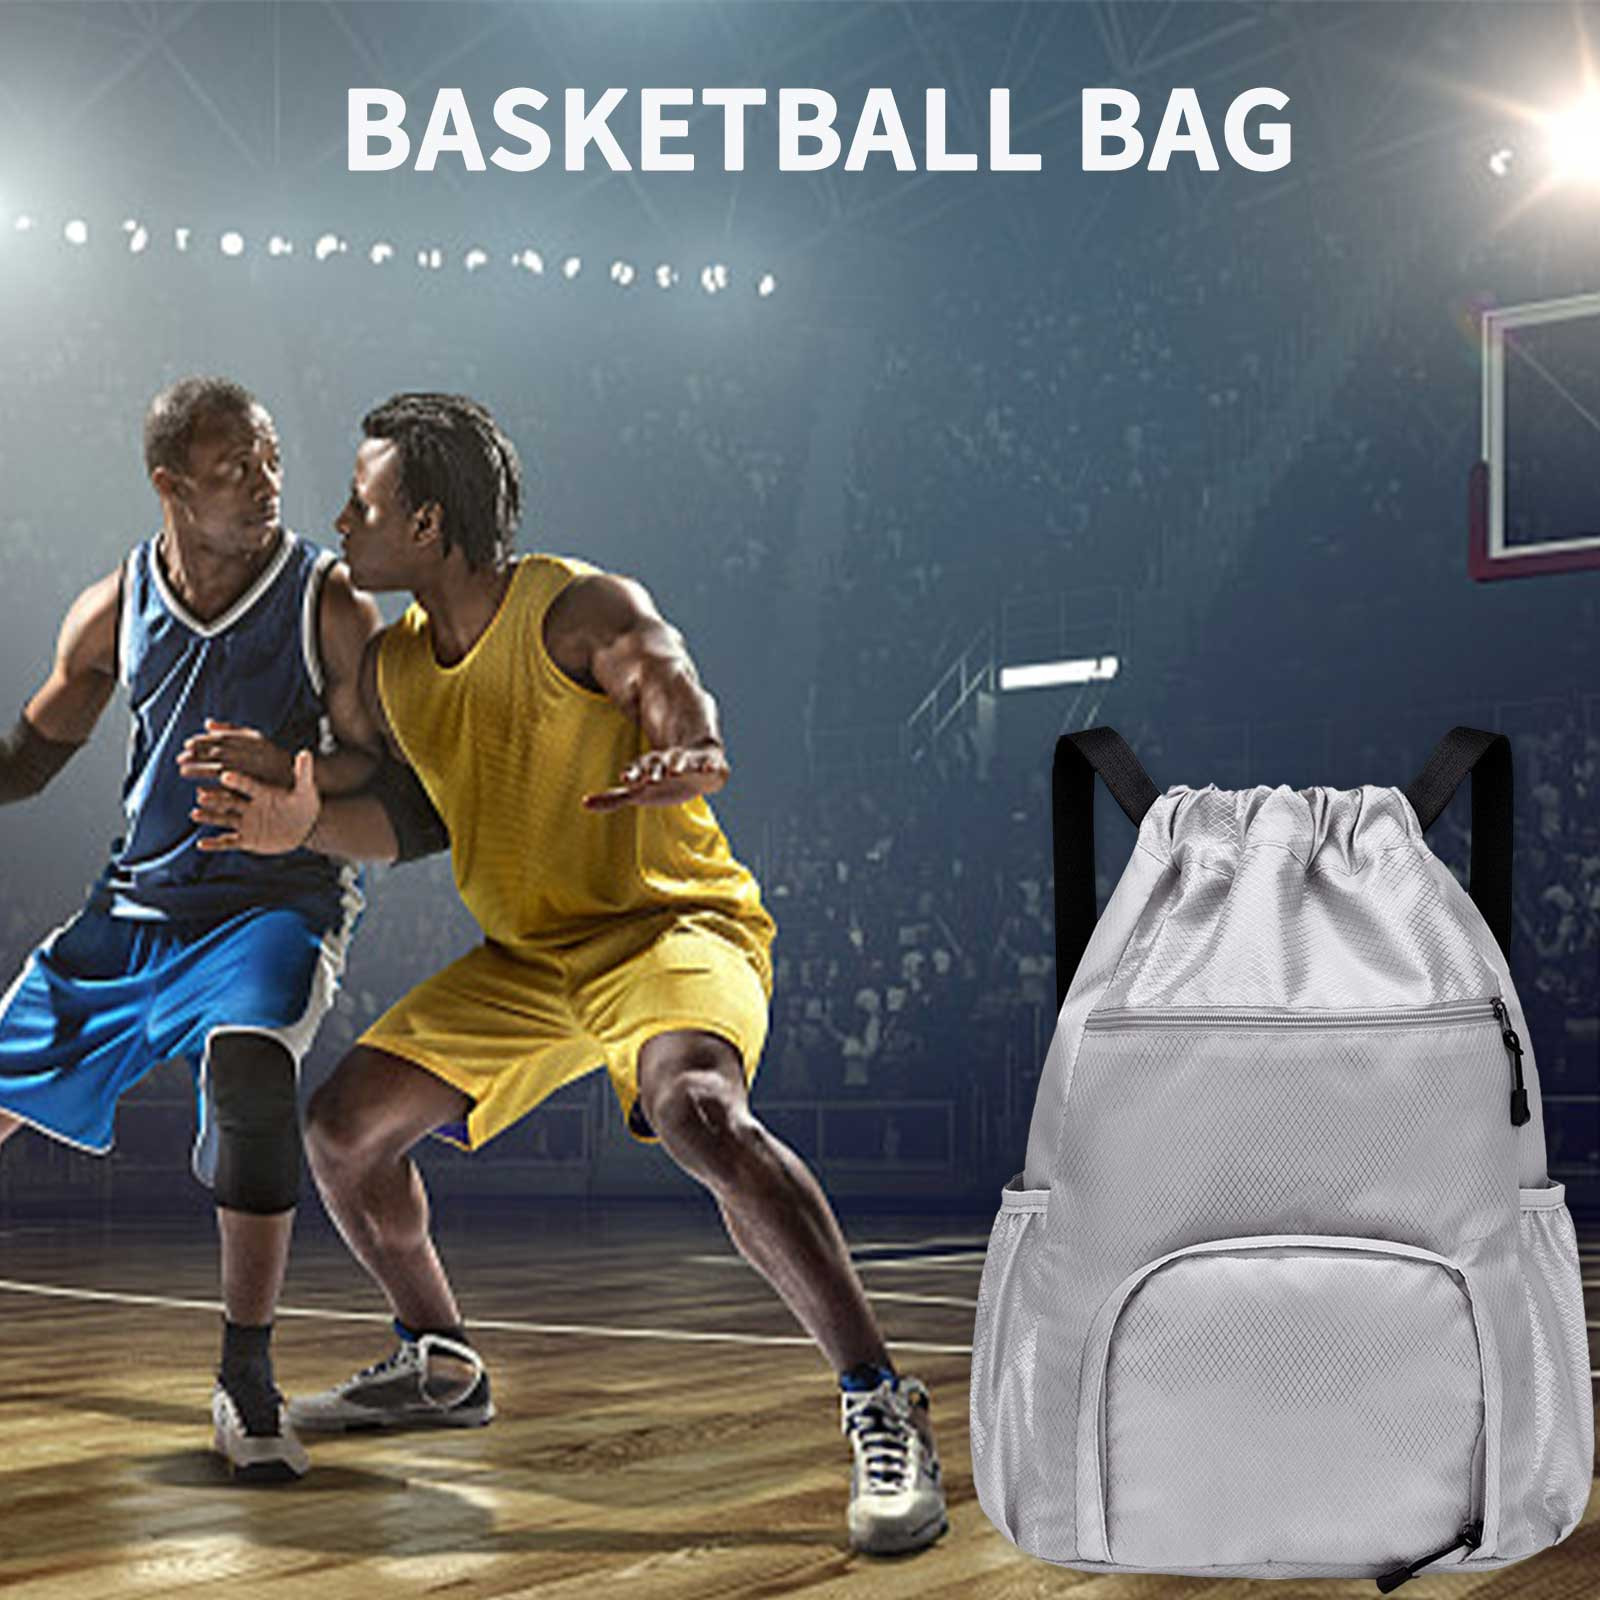 Sports Outdoors Sports Accessories Mesh Basketball Football Bag With Ball And Shoe Compartment For Boys Girls Man Women Ball Equipment Pack Soccer Backpack Sports Volleyball Gray - image 5 of 8